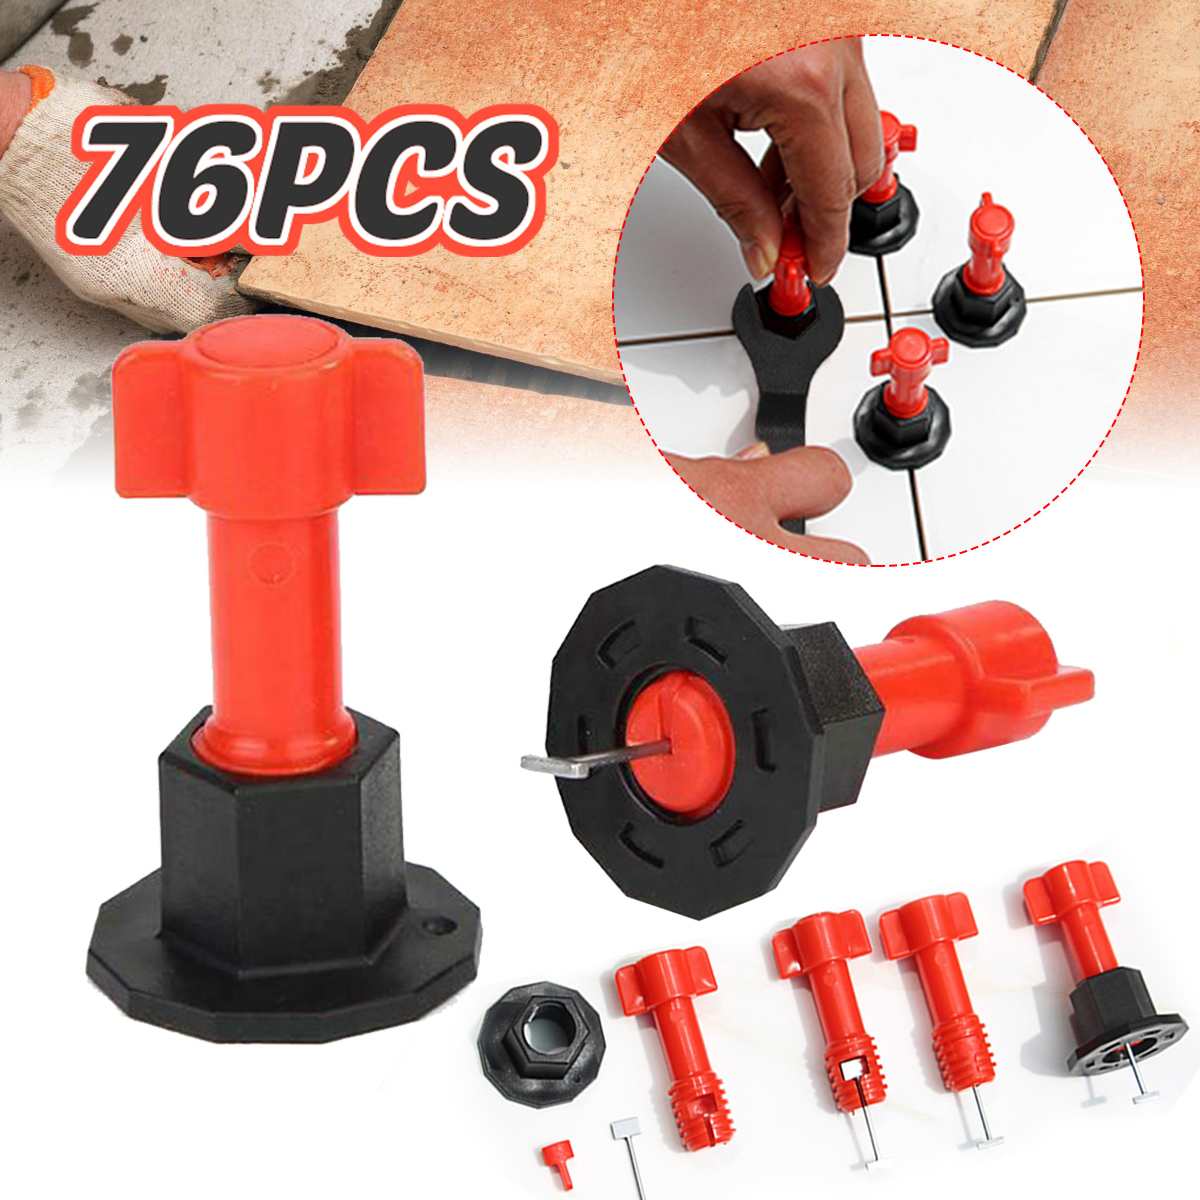 75pcs/set level wedges tile spacers for Flooring Wall Tile carrelage Leveling System Leveler Locator Spacers Plier with Wrench